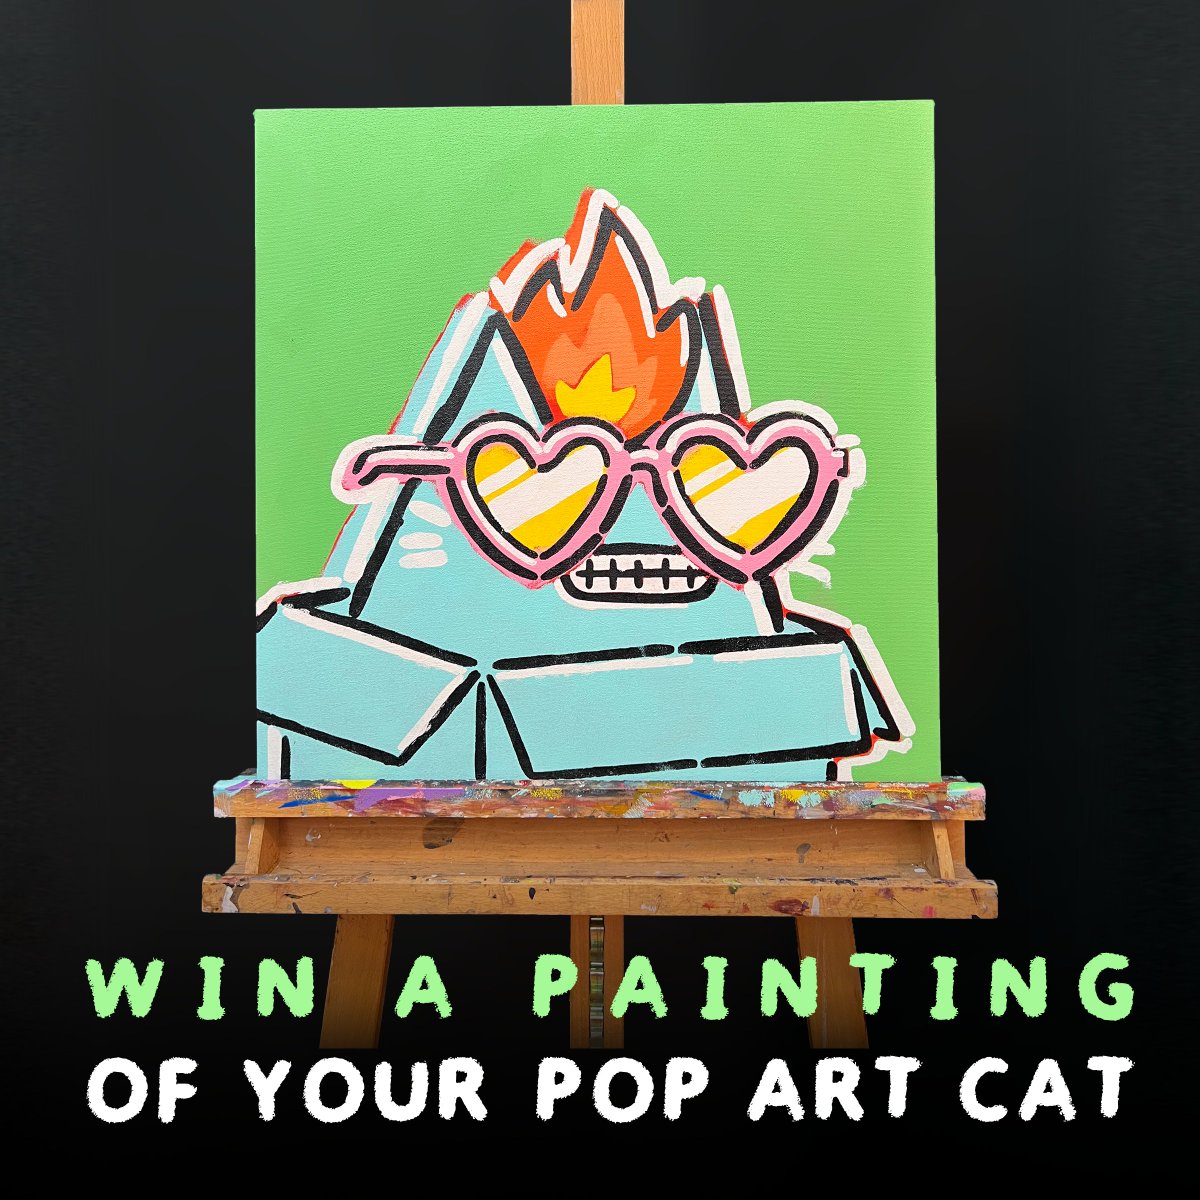 GIVEAWAY!!! Every week, @mattchessco paints a lucky holder's Pop Art Cat. To enter: Like, RT, Follow us, Post an image of your Pop Art Cat in the comments. Announcing the winner in ∼24 hours. Tune in to Matt's livestream tomorrow (Sunday) at 9pm EST.